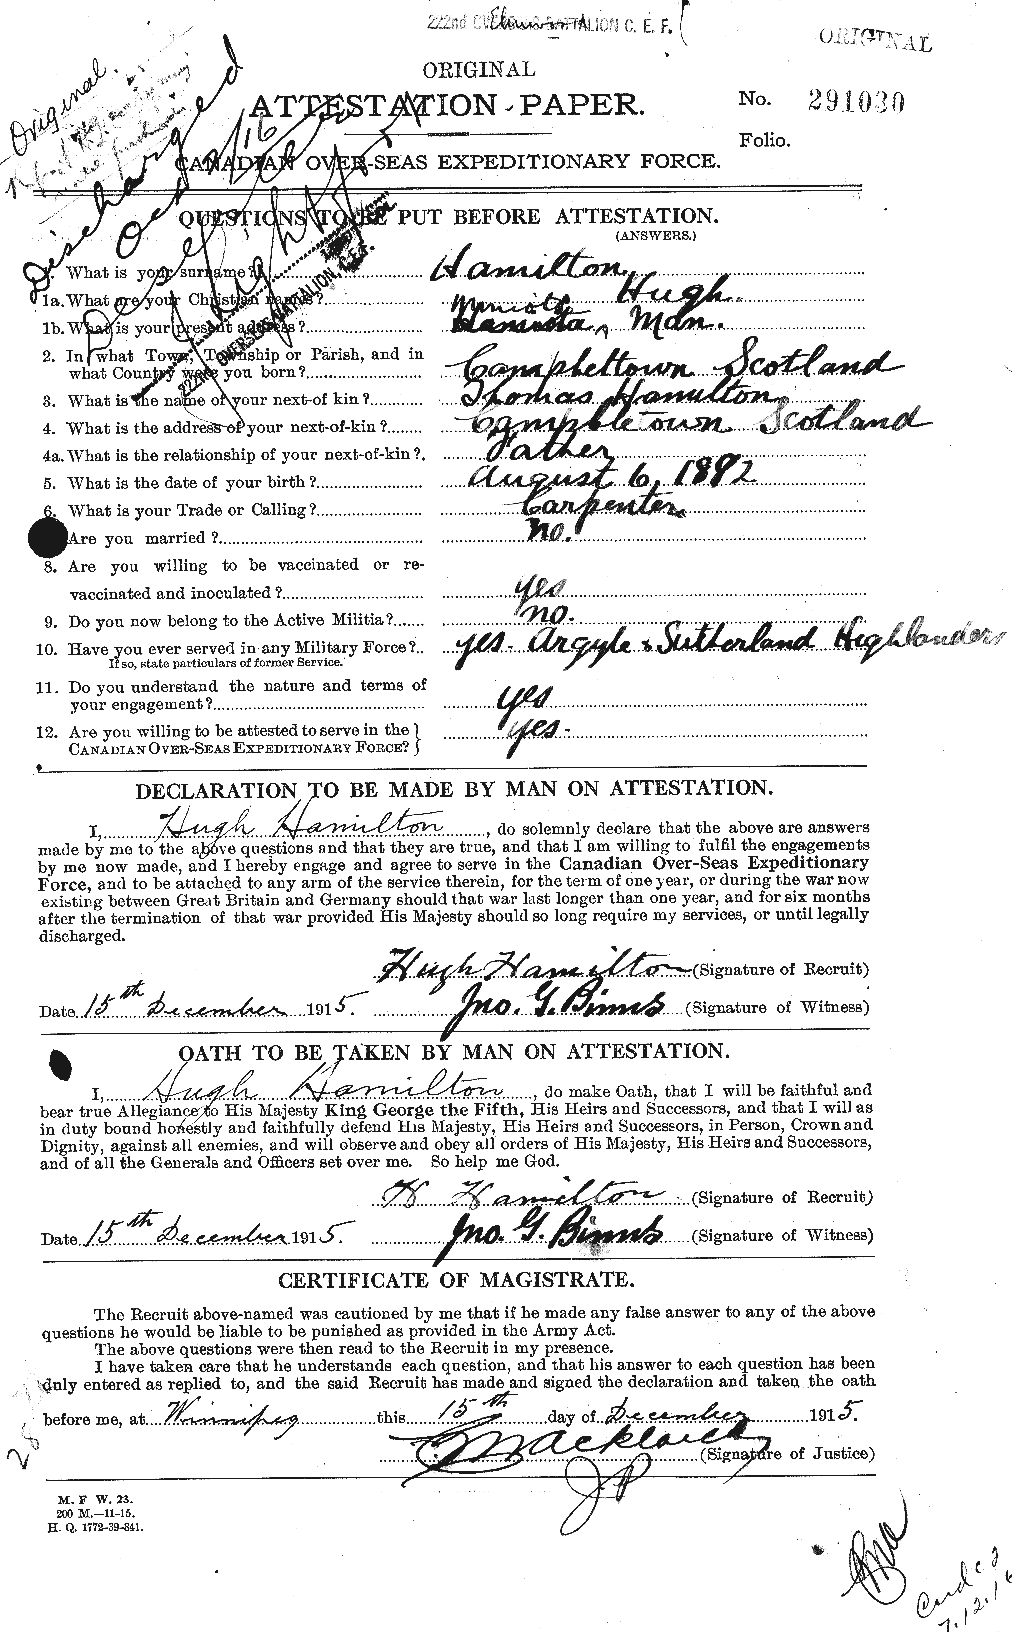 Personnel Records of the First World War - CEF 372914a